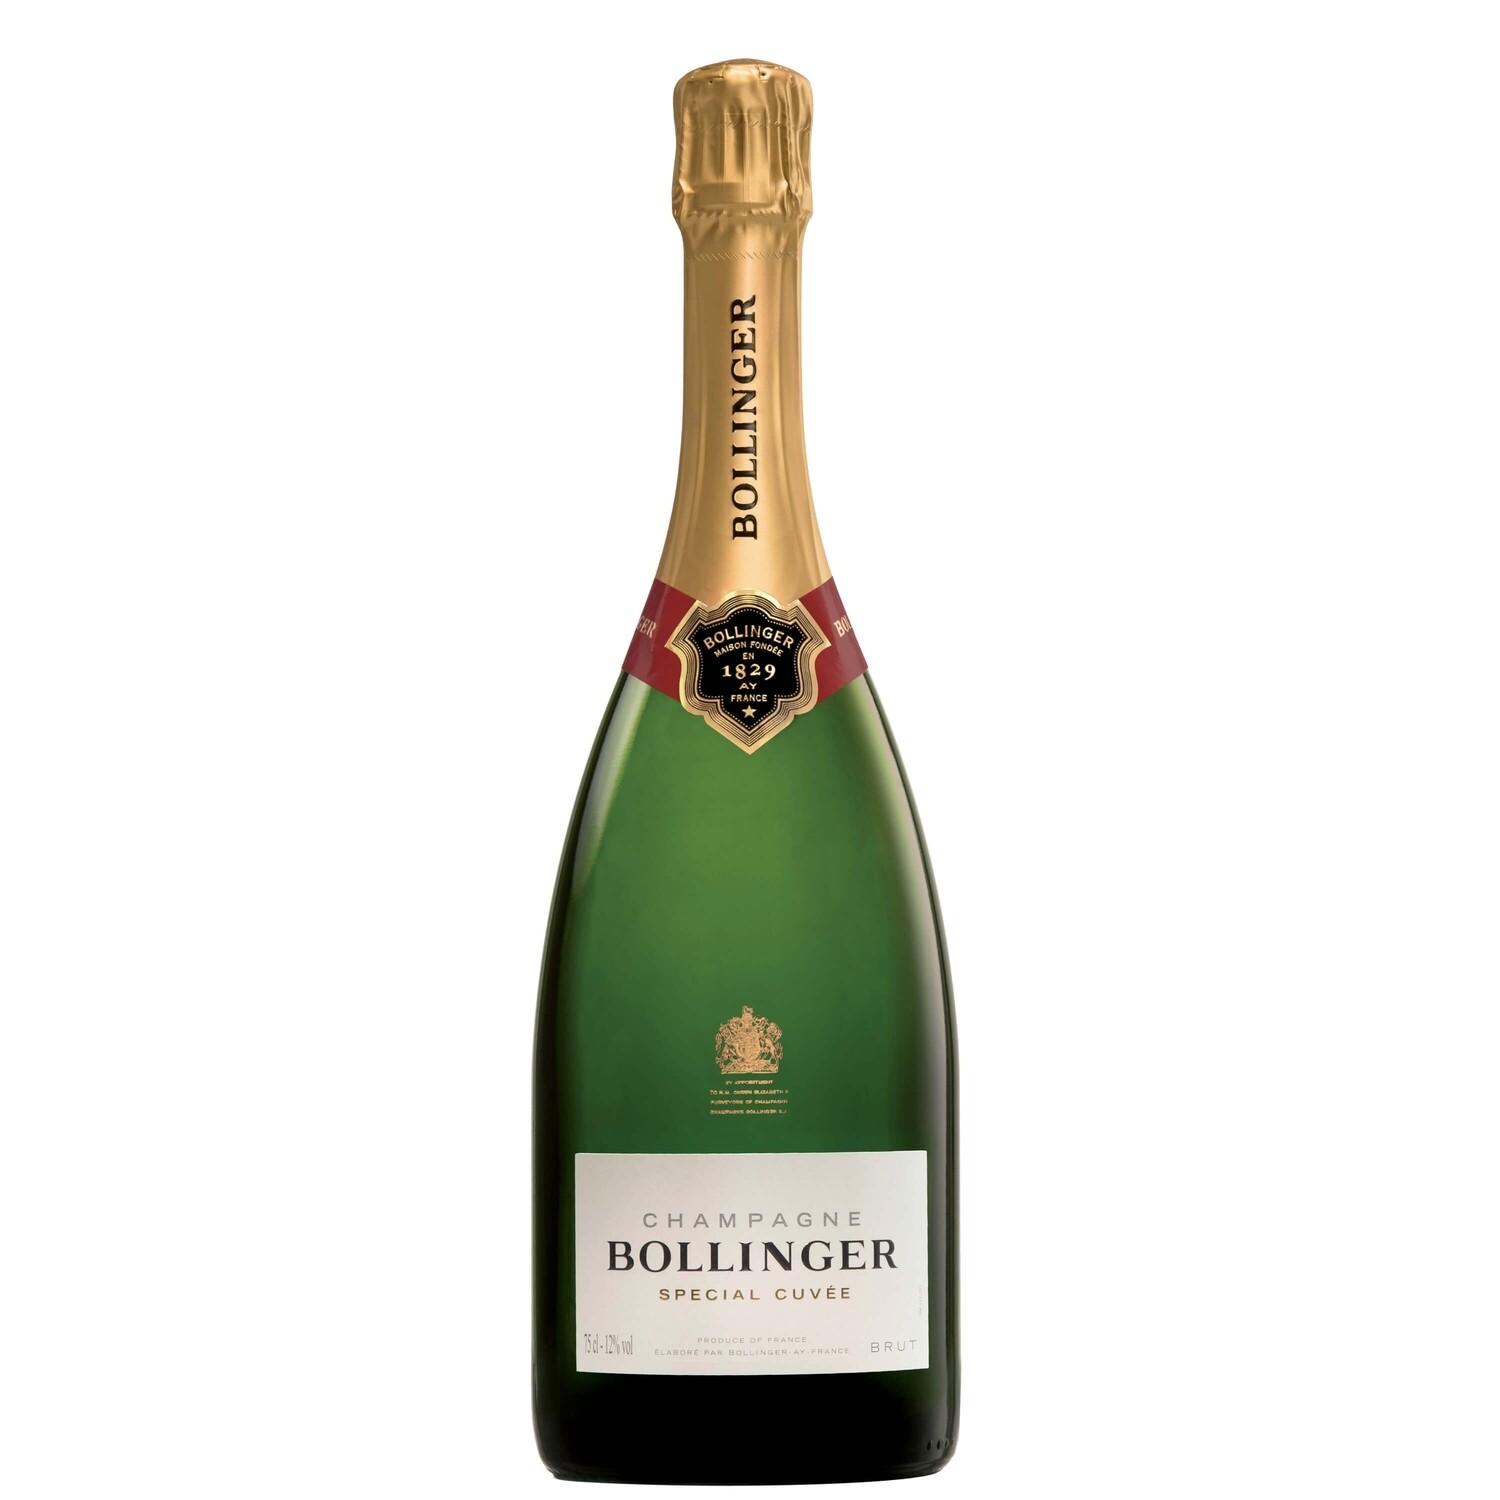 BOLLINGER SPECIAL CUVEE CHAMPAGNE BRUT CL 75